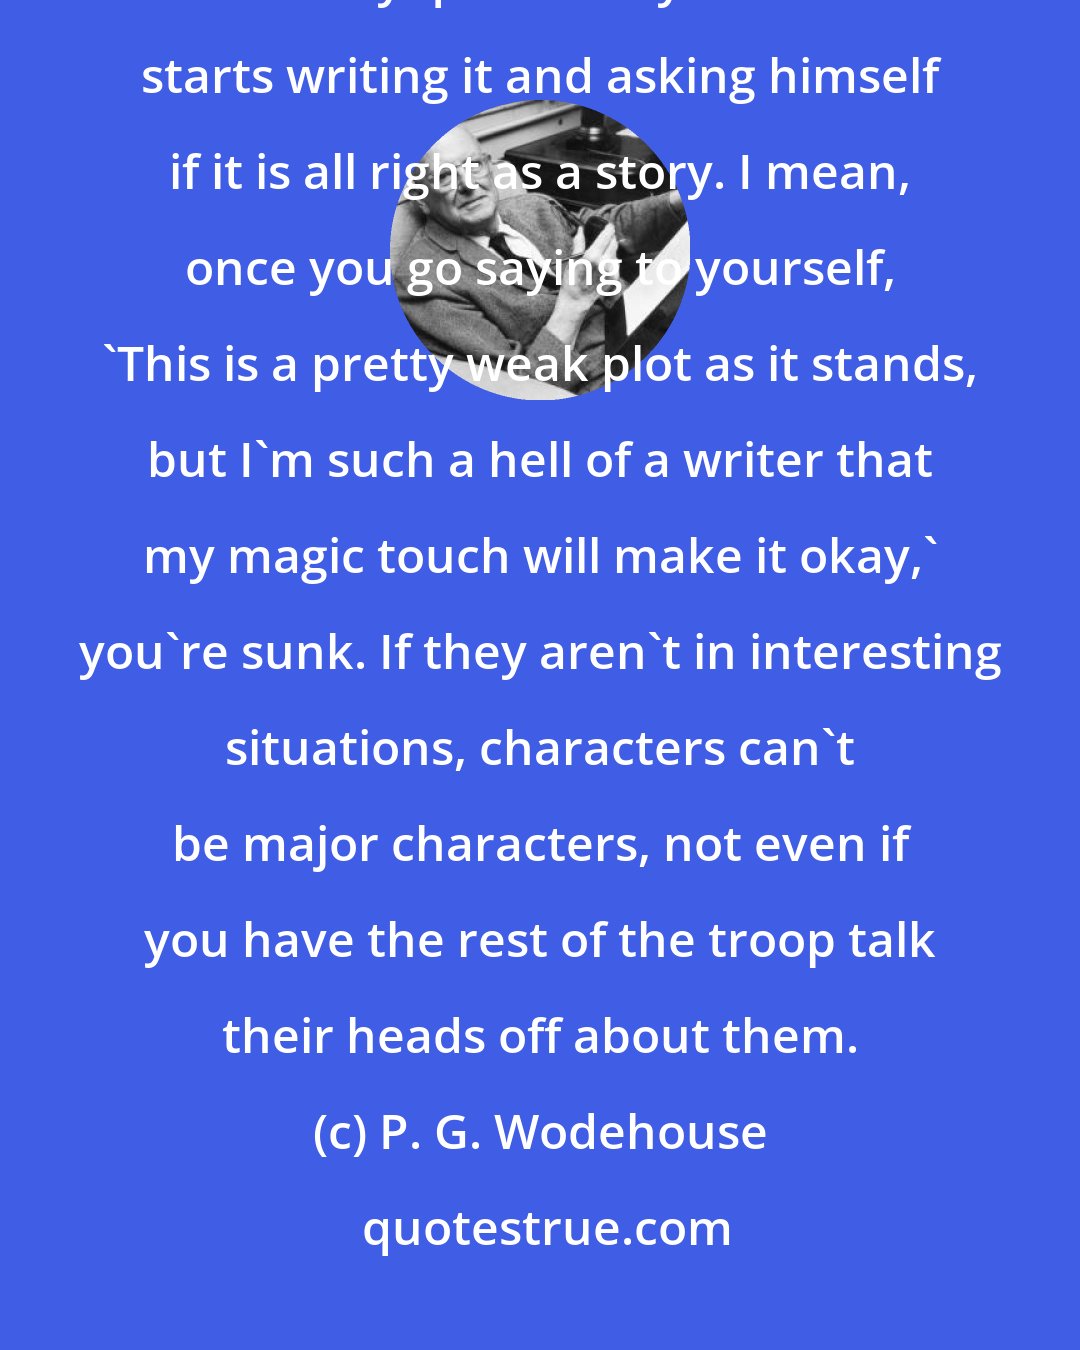 P. G. Wodehouse: I believe the only way a writer can keep himself up to the mark is by examining each story quite coldly before he starts writing it and asking himself if it is all right as a story. I mean, once you go saying to yourself, 'This is a pretty weak plot as it stands, but I'm such a hell of a writer that my magic touch will make it okay,' you're sunk. If they aren't in interesting situations, characters can't be major characters, not even if you have the rest of the troop talk their heads off about them.